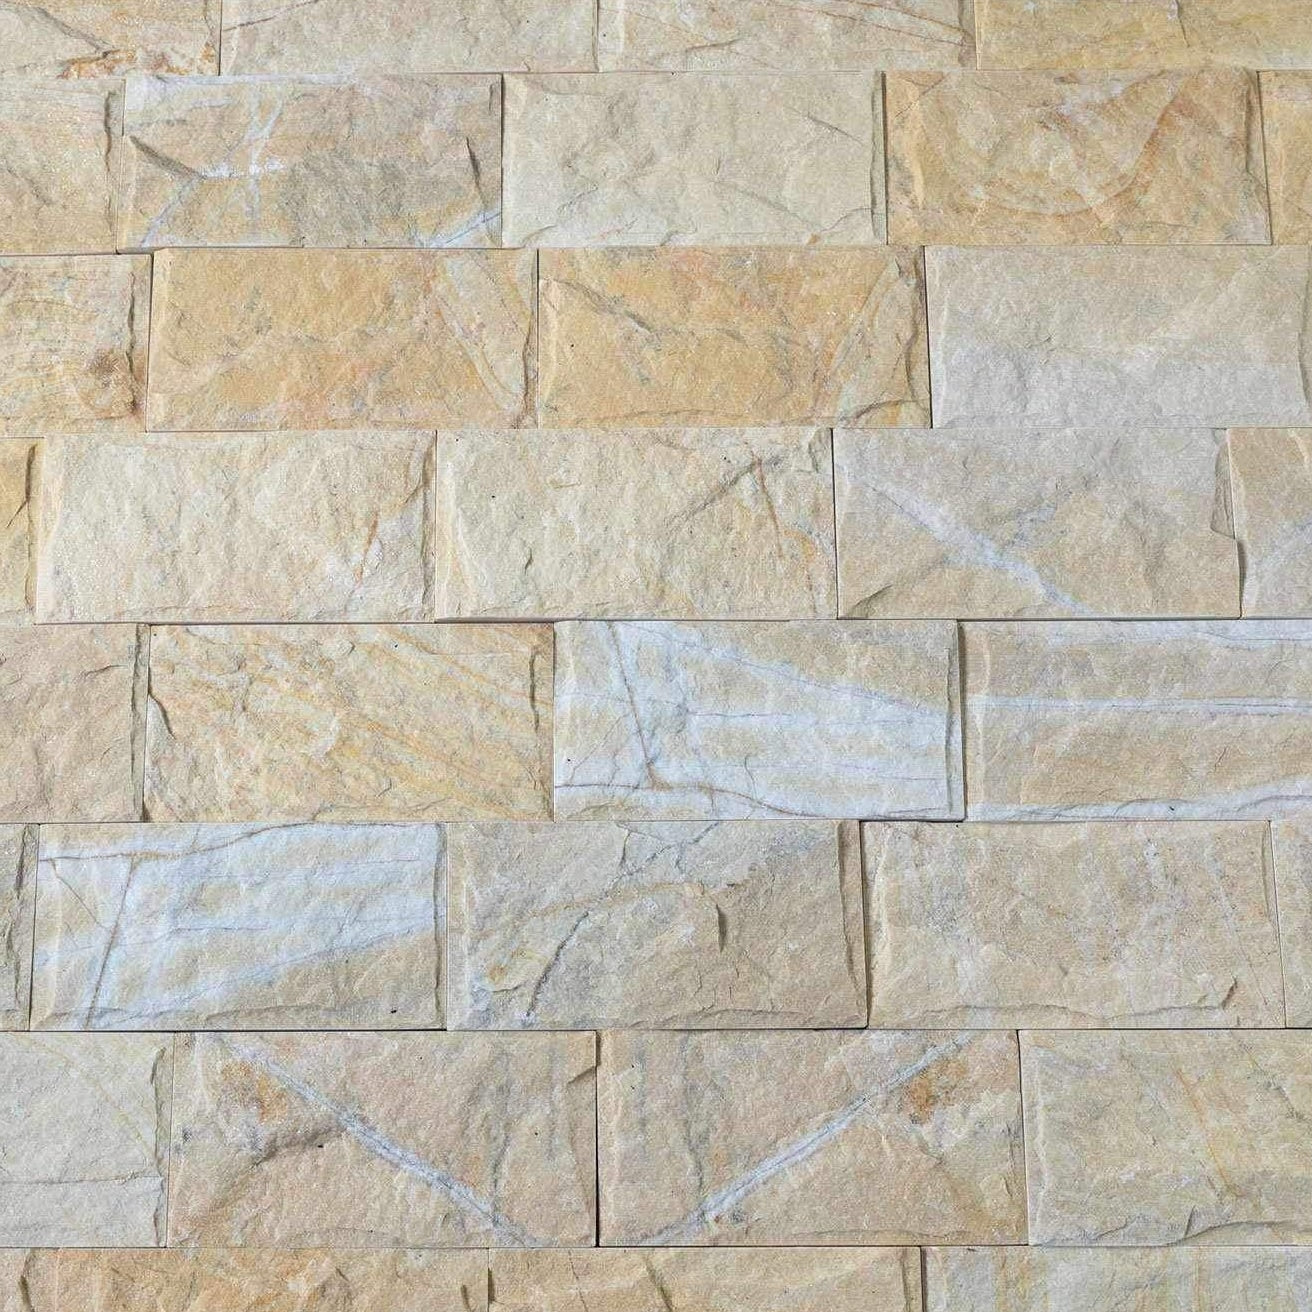 Natural Stacked Stone Feature Wall Cladding Panels - Golden Mushroom Stone and Rock